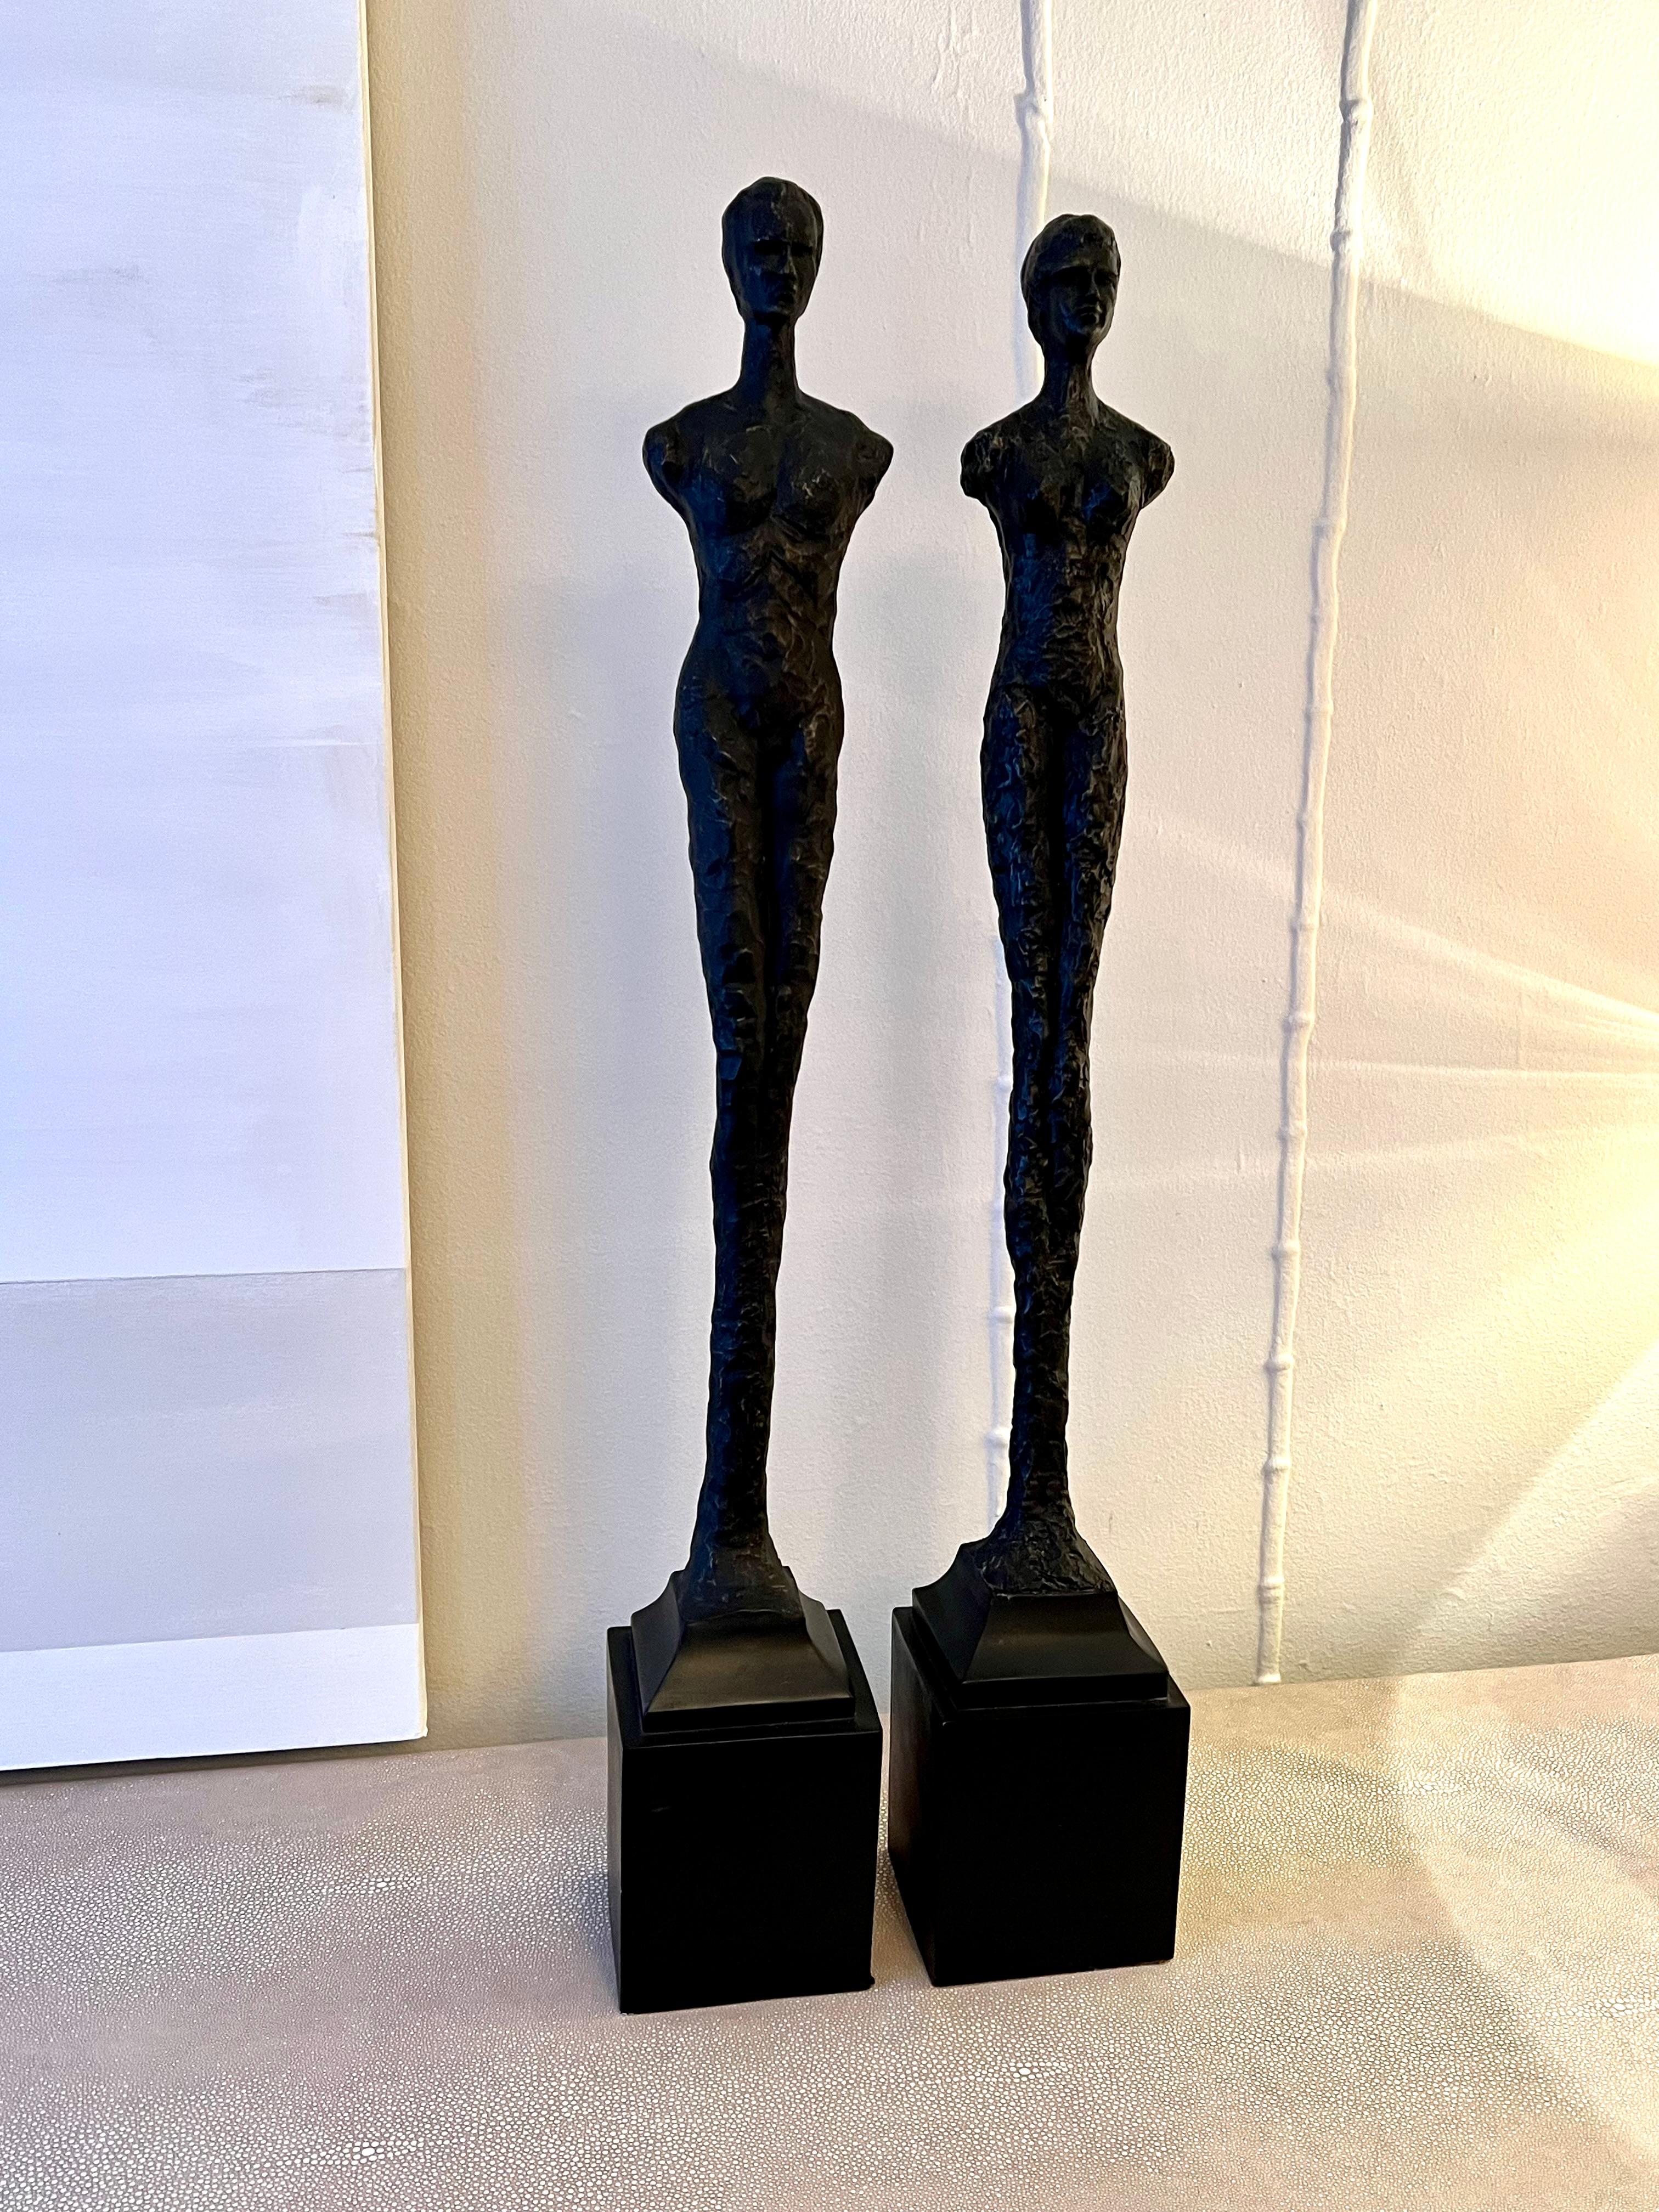 Pair of Figurative Statues in the Style of Giacometti 1